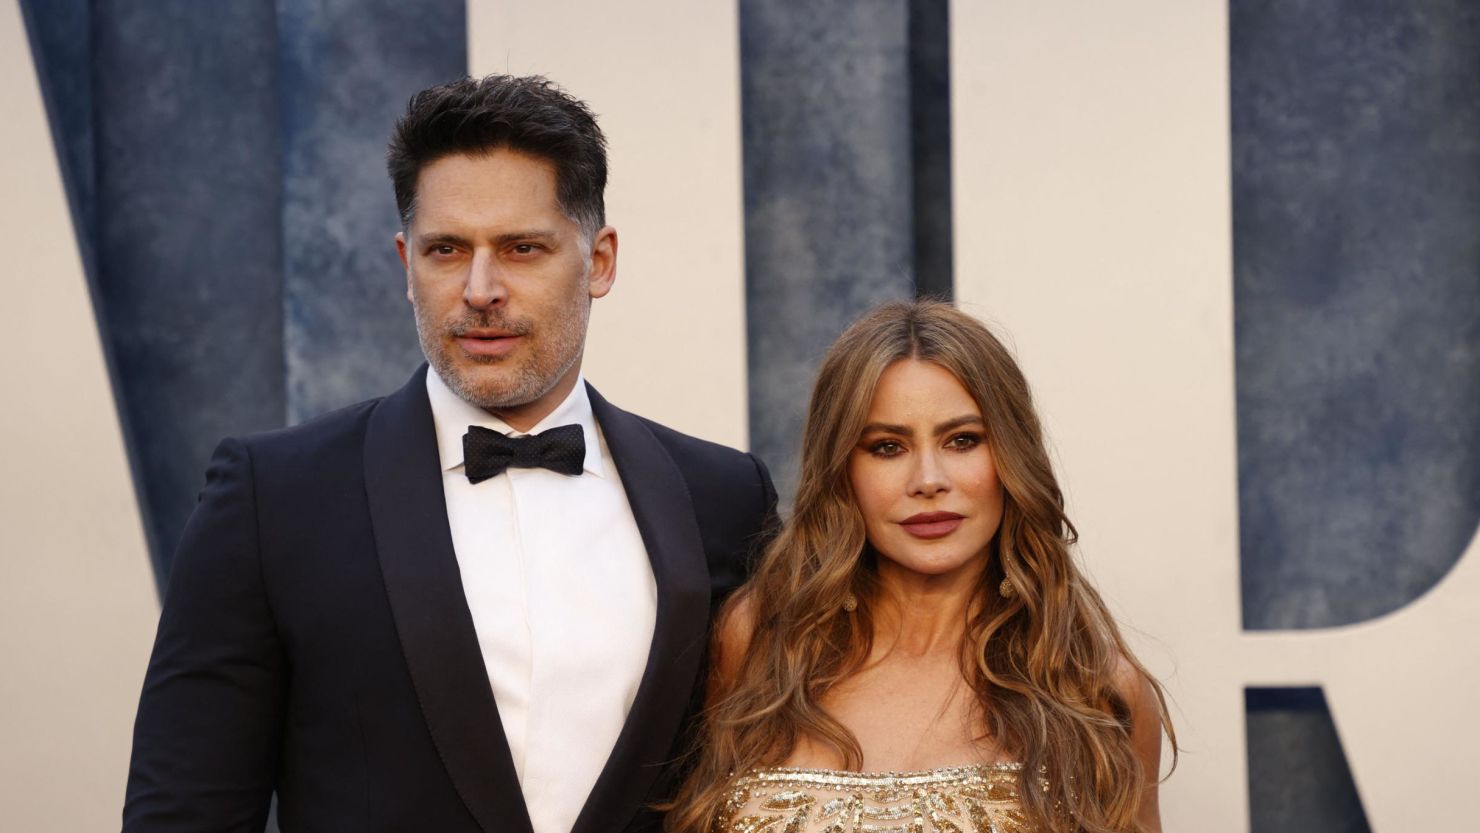 Colombian-American actress Sofía Vergara and her husband, US actor Joe Manganiello, attend the Vanity Fair 95th Oscars Party at the The Wallis Annenberg Center for the Performing Arts in Beverly Hills, California on March 12, 2023. (Photo by Michael TRAN / AFP) (Photo by MICHAEL TRAN/AFP via Getty Images)